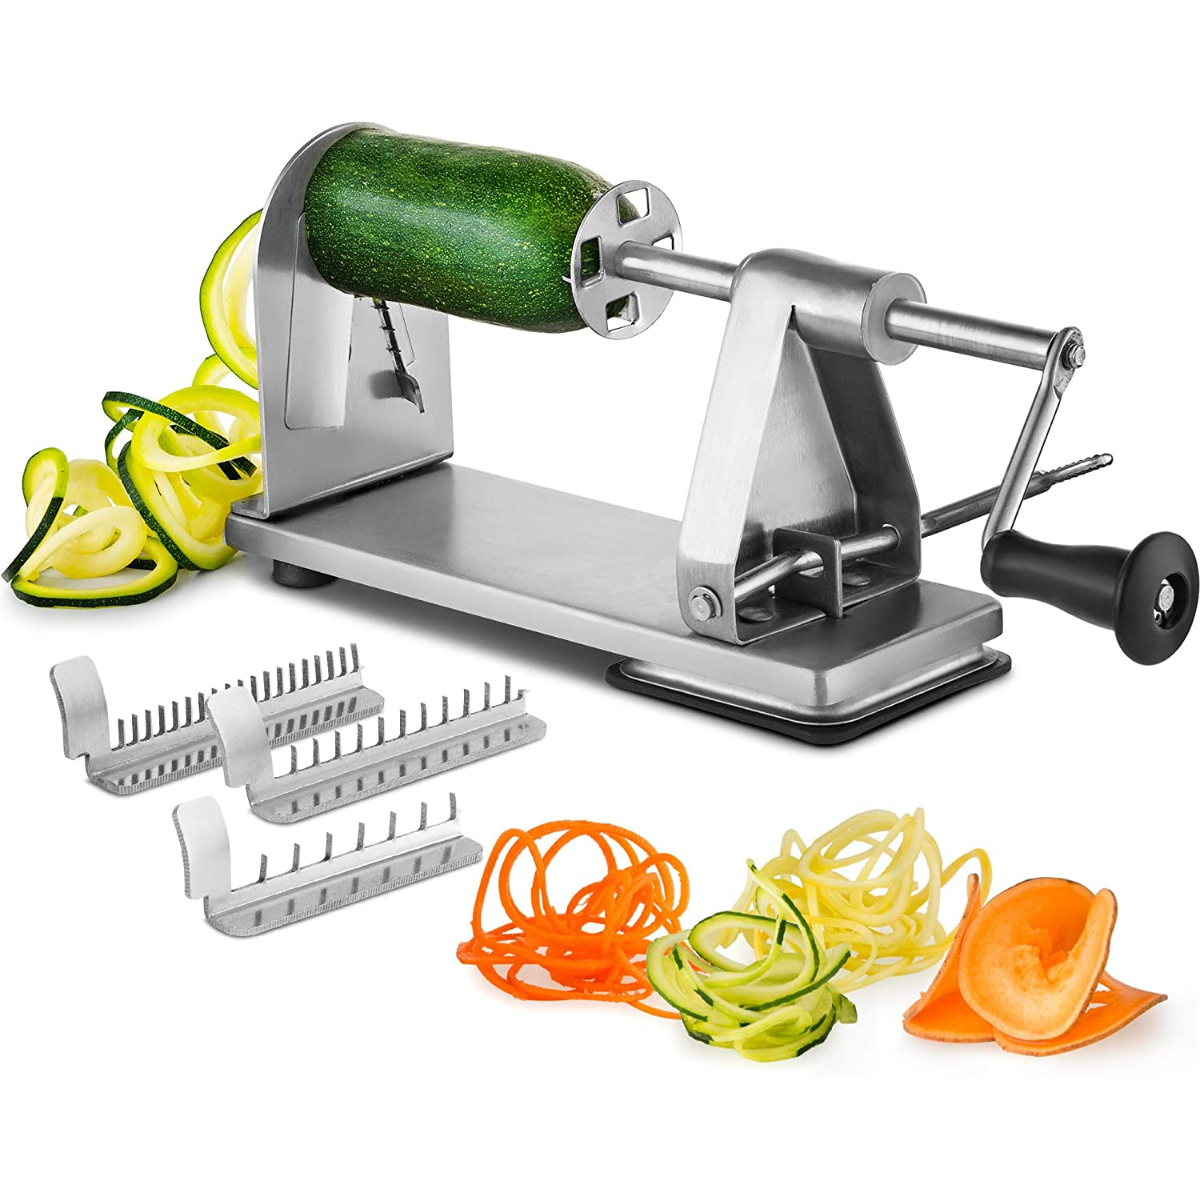 Premium Stainless Steel Spiralizer, Industrial-Grade Zoodle Maker, by  iohhjghjhj